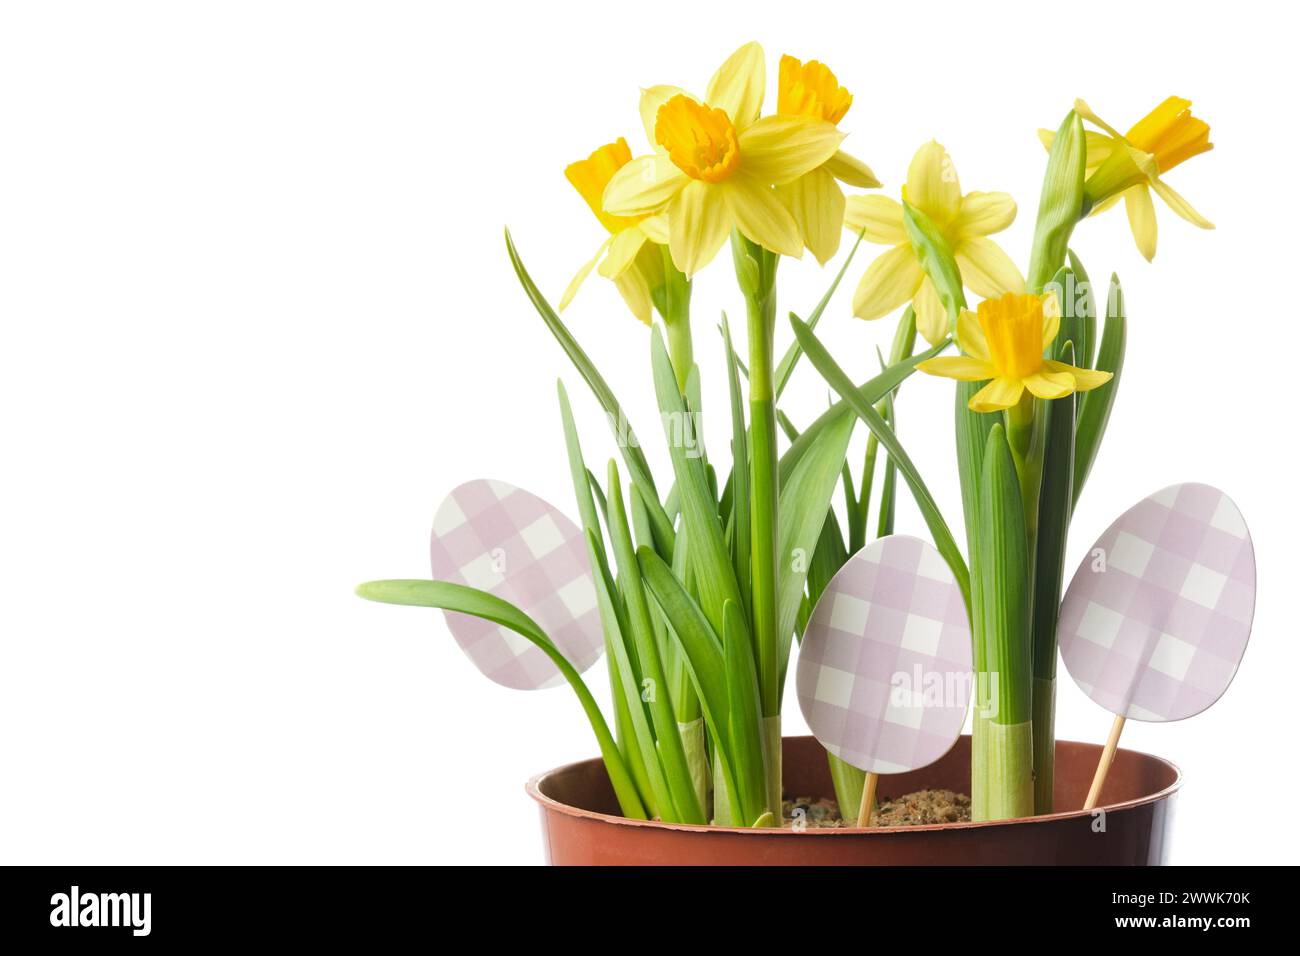 Pot with narcissus  flowers, daffodils close up decorated with easter eggs, isolated on white. Stock Photo